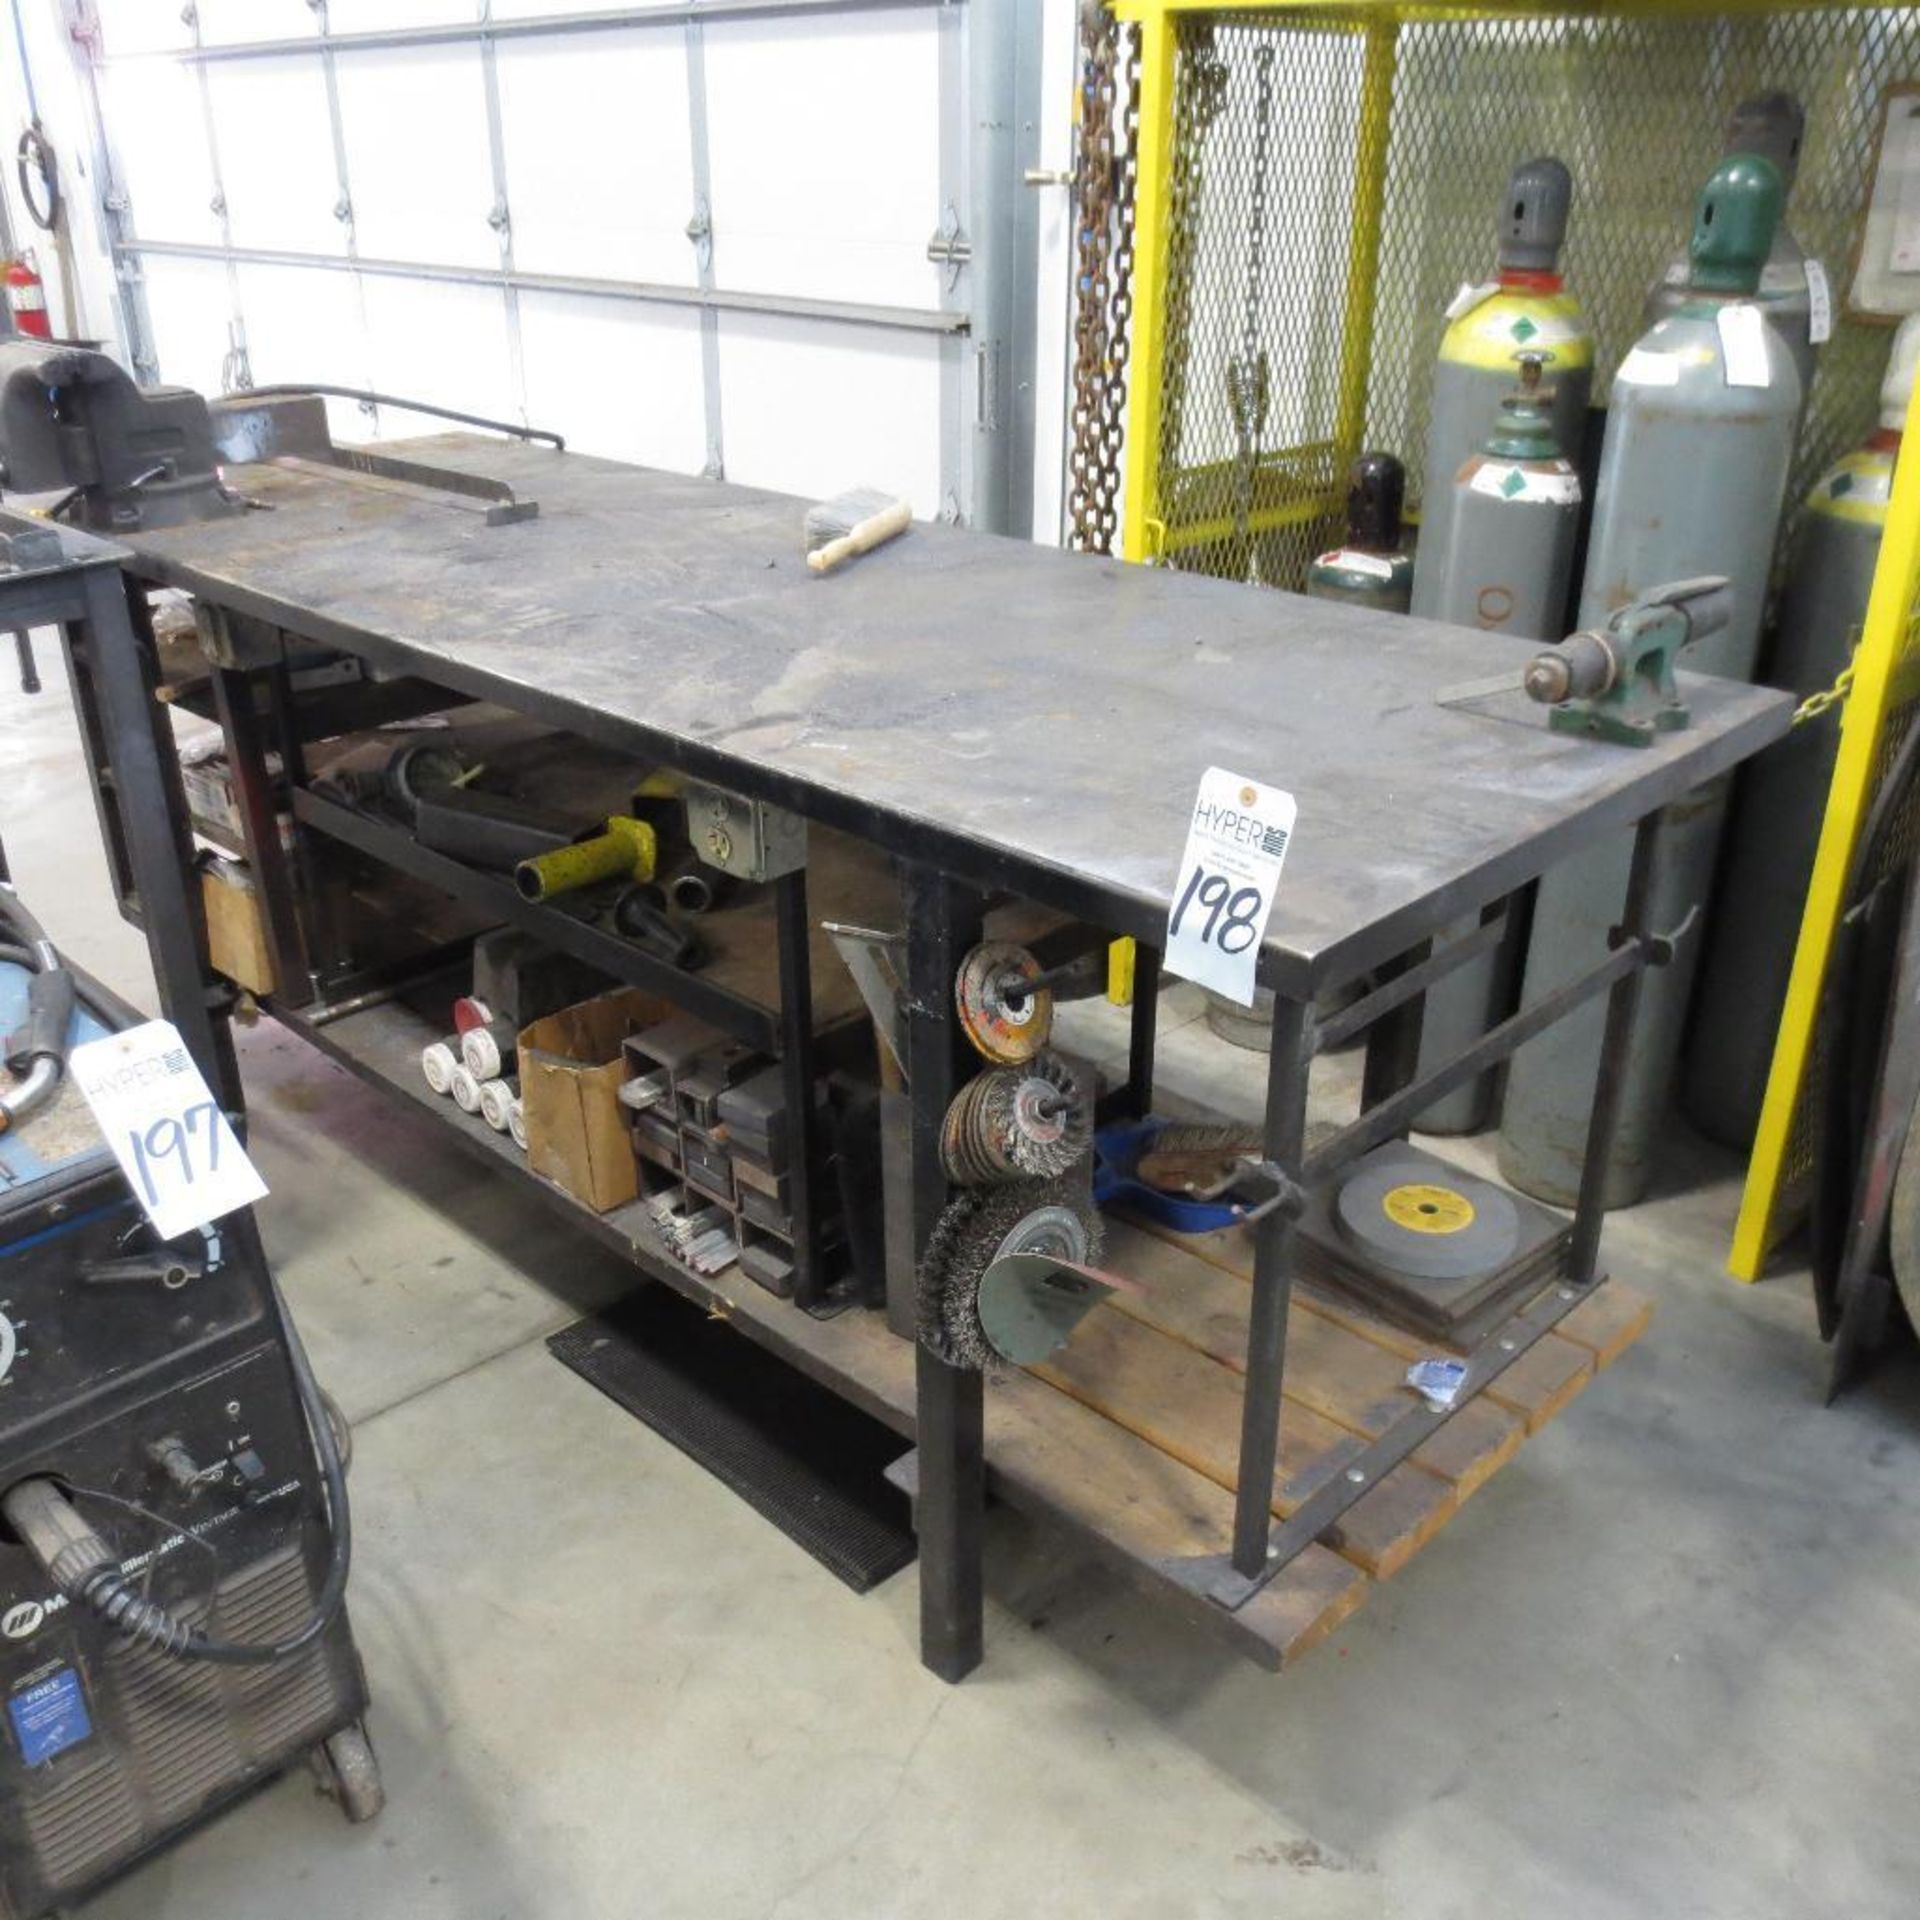 96 1/2" X 33" Steel Table with Vise